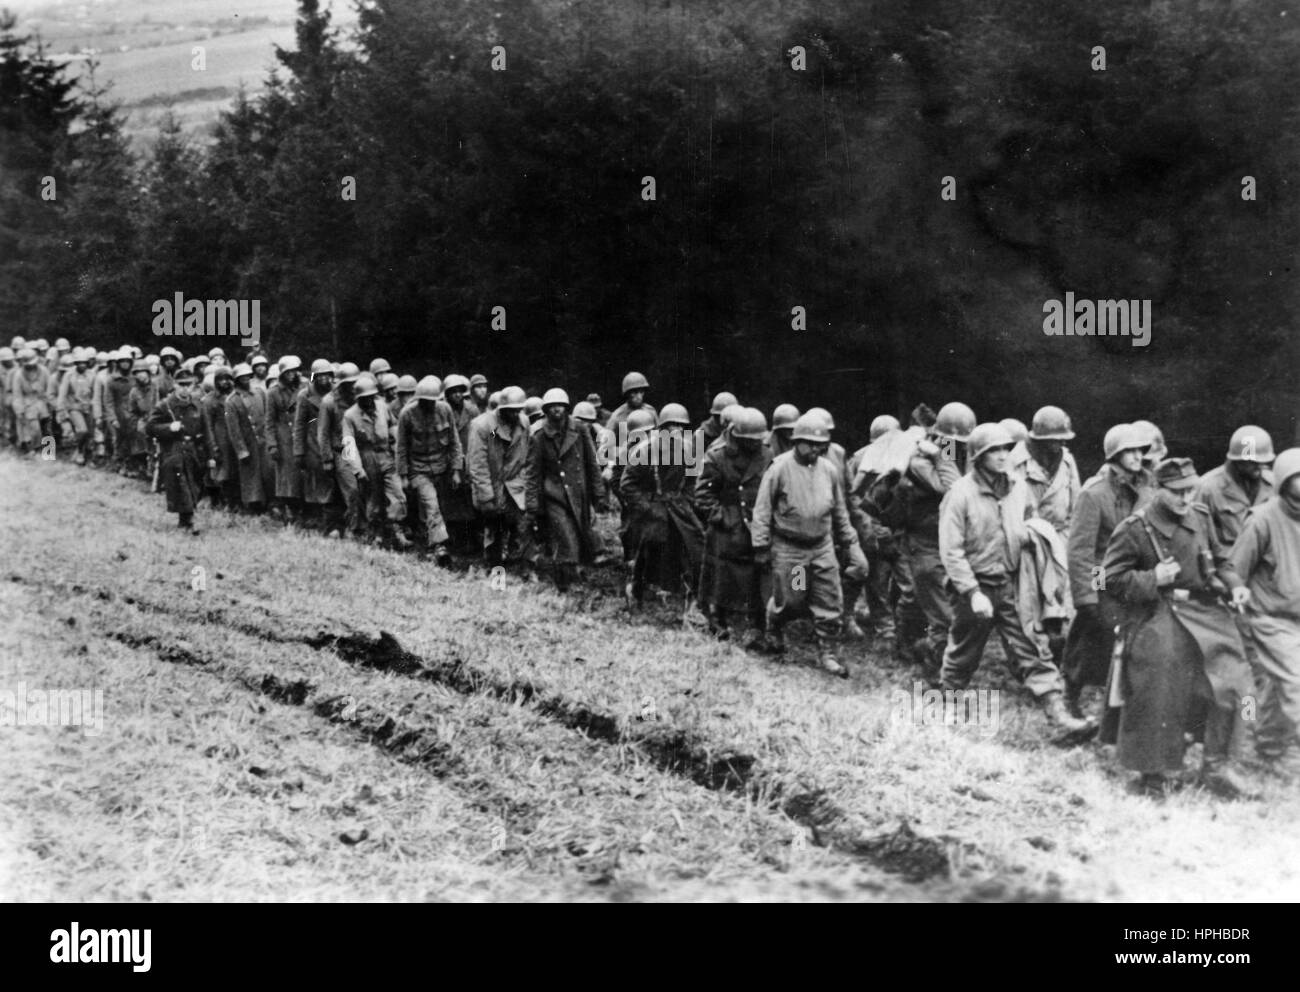 The Nazi propaganda image shows US-American soldiers after being taken prisoner by the German Wehrmacht on the Western Front. Published in December 1944. A Nazi reporter has written on the reverse of the picture on 28.12.1944, 'Prisoners from the Western Offensive being brought in. Between the Hohe Venn and the Northern part of Luxembourg, strong German forces have been on the offensive since 16.12.1944 and have overwhelmed North American bases. Already in the first few days, our troops have made thousands of prisoners carry out the march to German soil, quite contrary to what they would have  Stock Photo